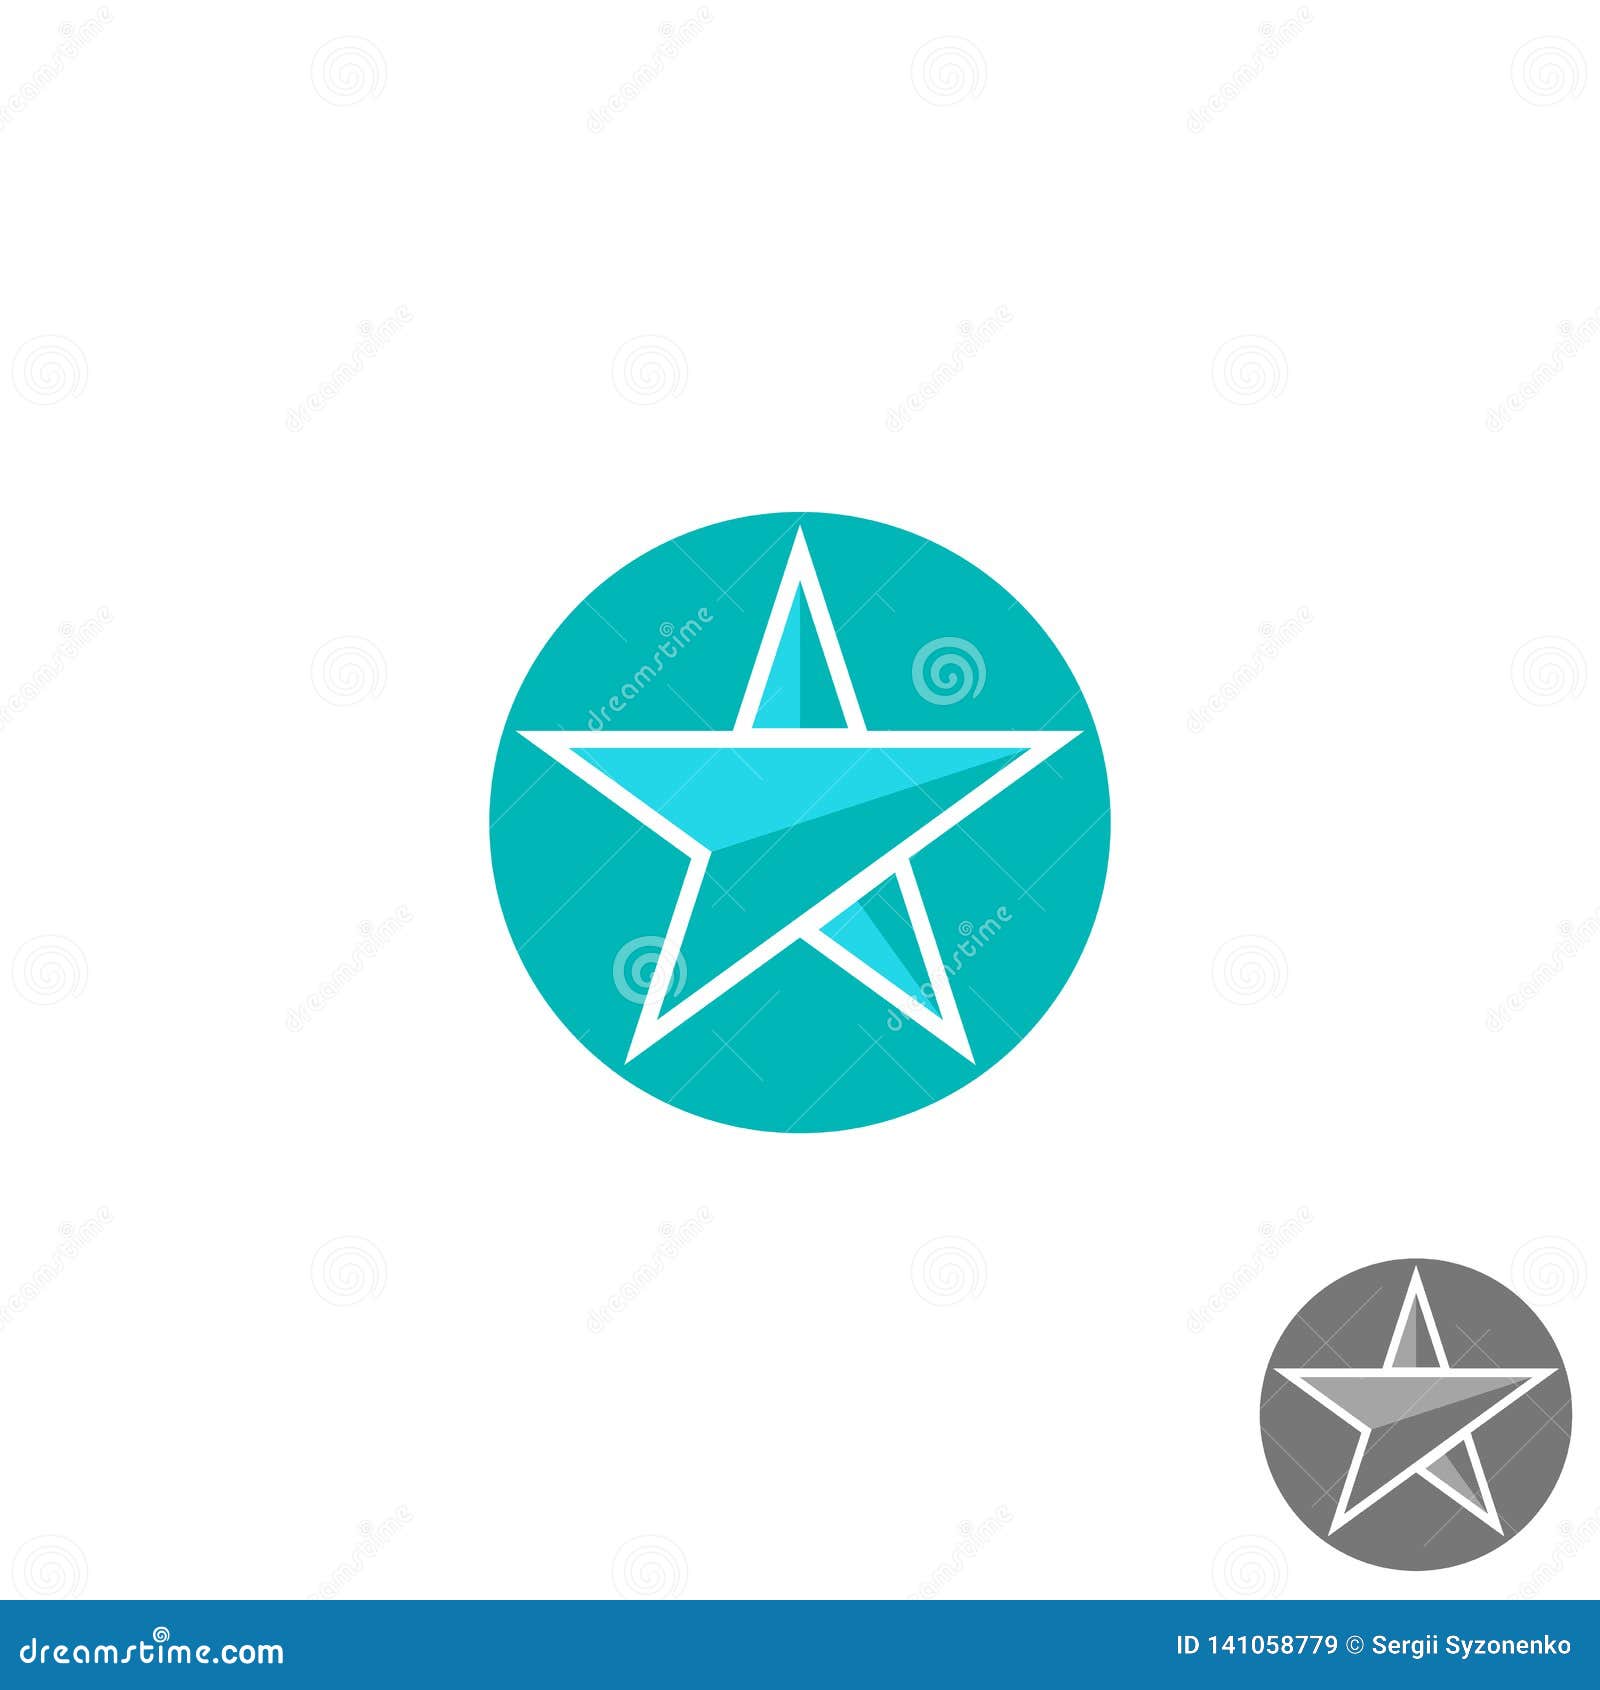 Premium Vector | The logo of the stars inside the red circle